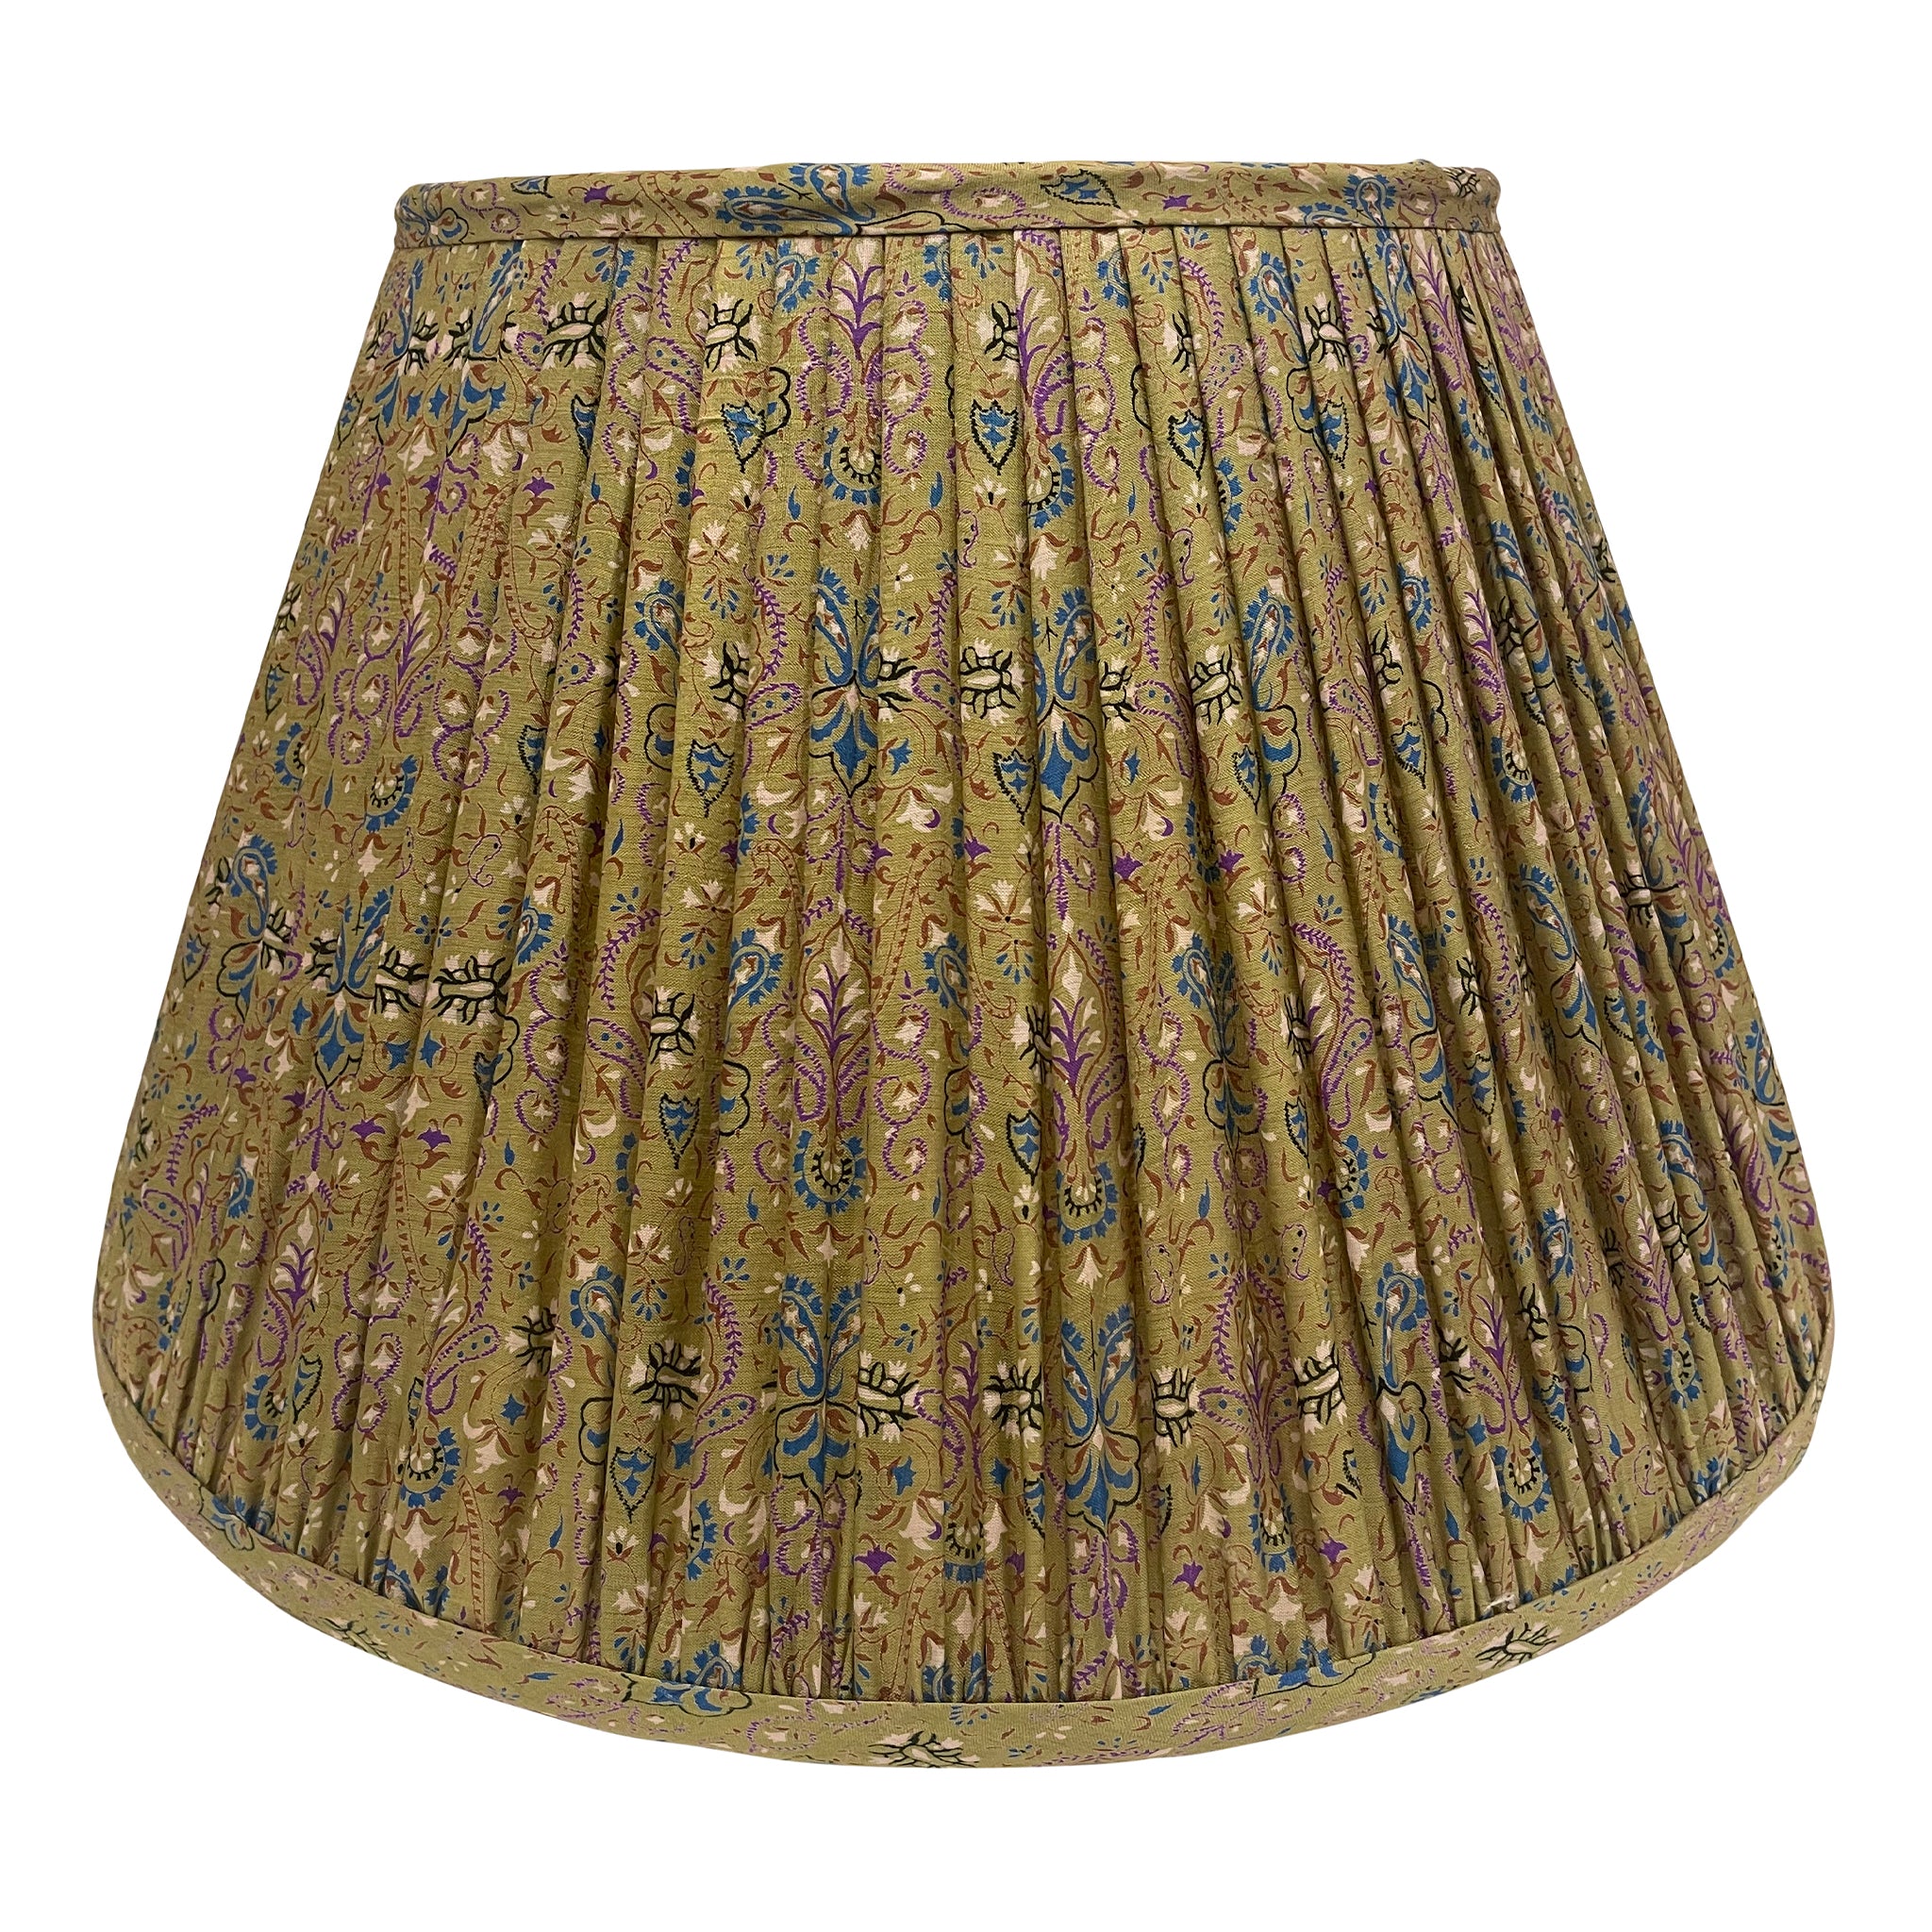 16" Silk Sari Lampshade - Olive with Teal Floral